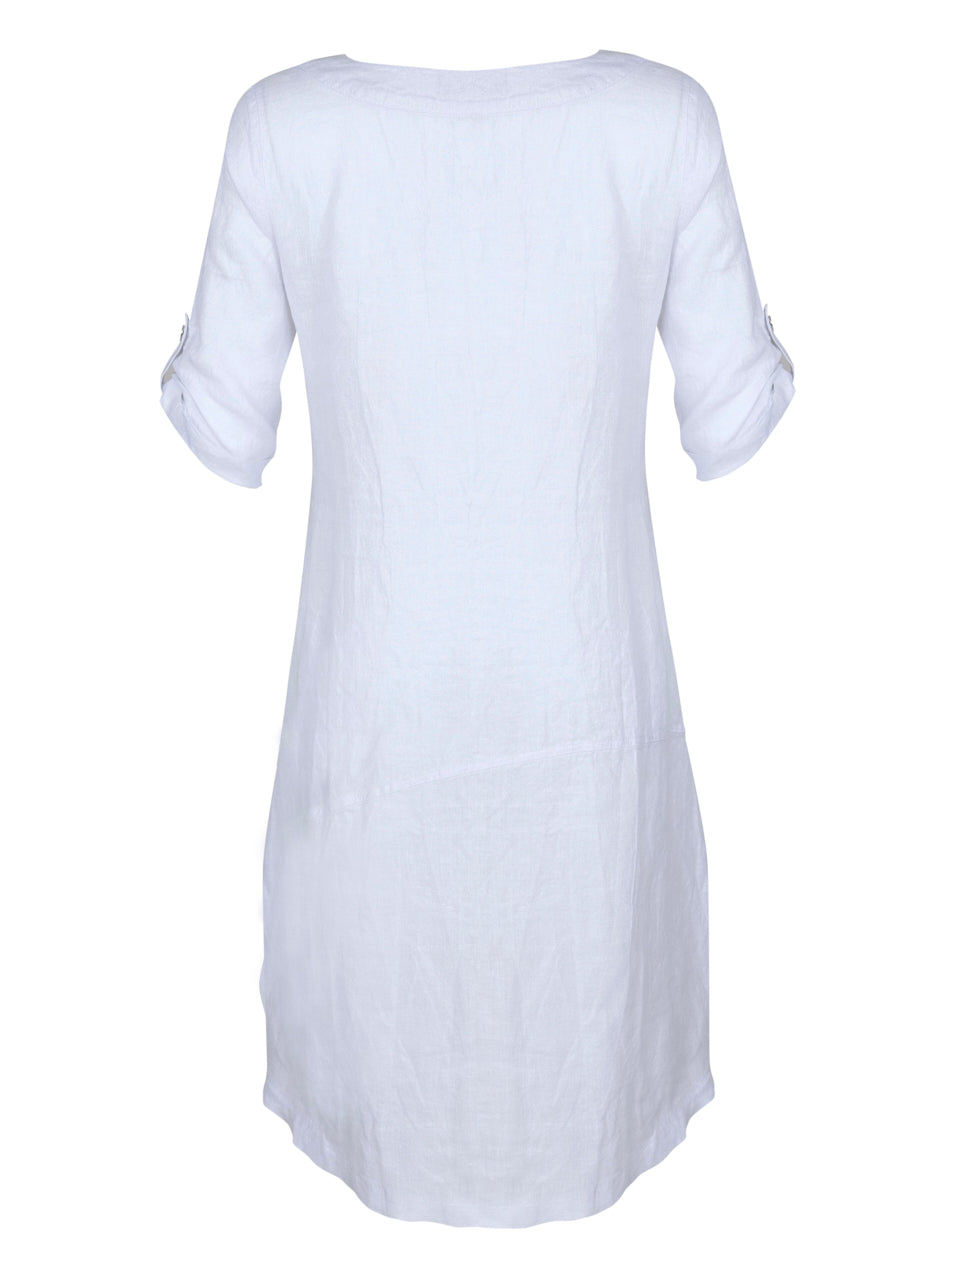 EverSassy Spring 2023 women's casual linen shift t-shirt dress with pocket - white back